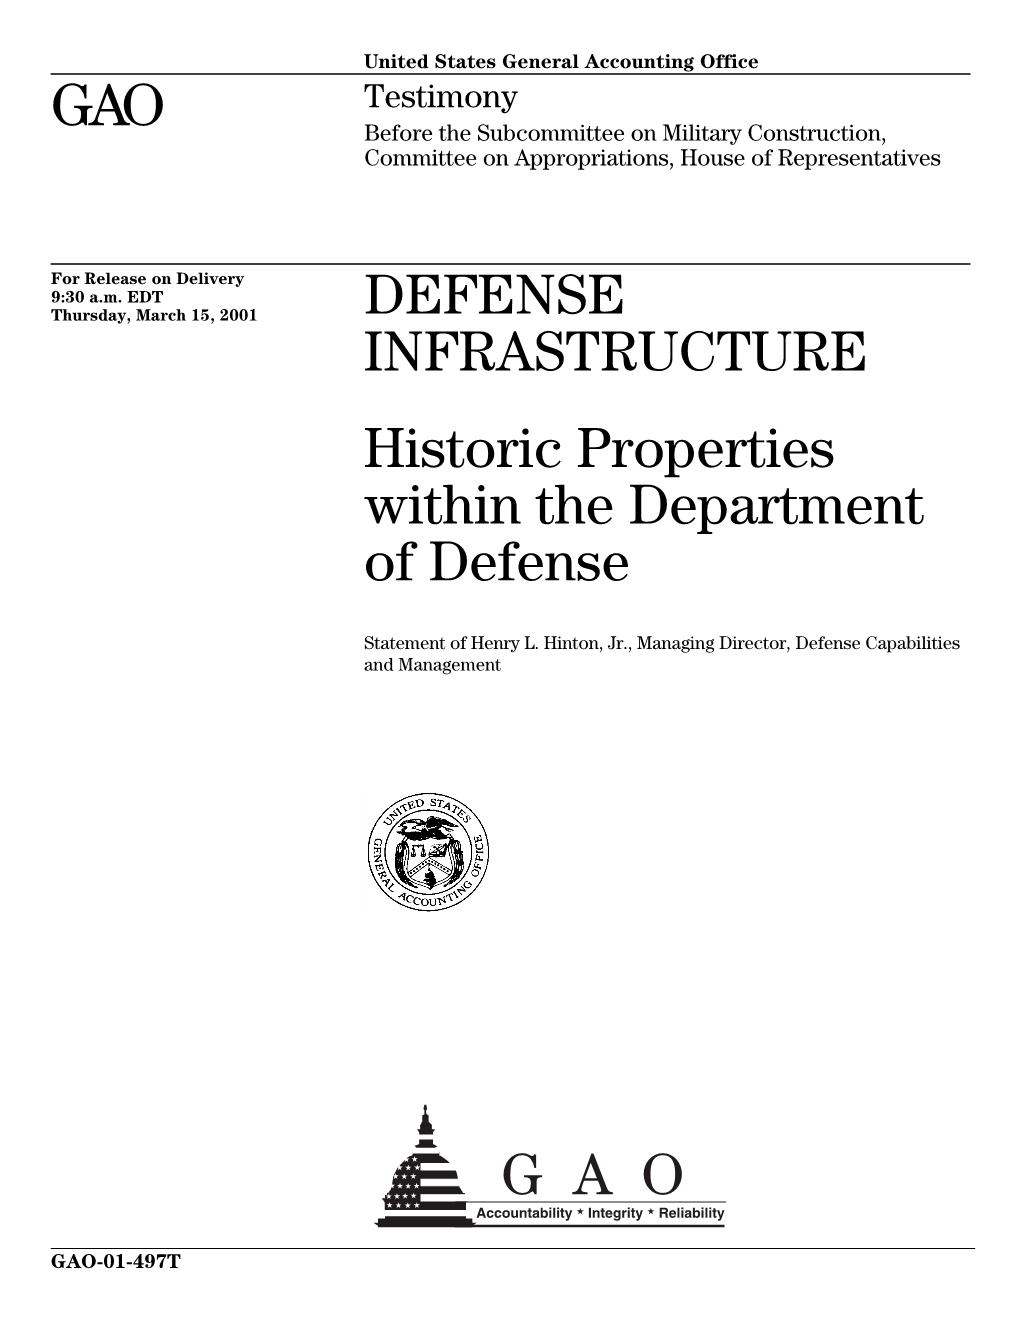 DEFENSE INFRASTRUCTURE Historic Properties Within the Department of Defense